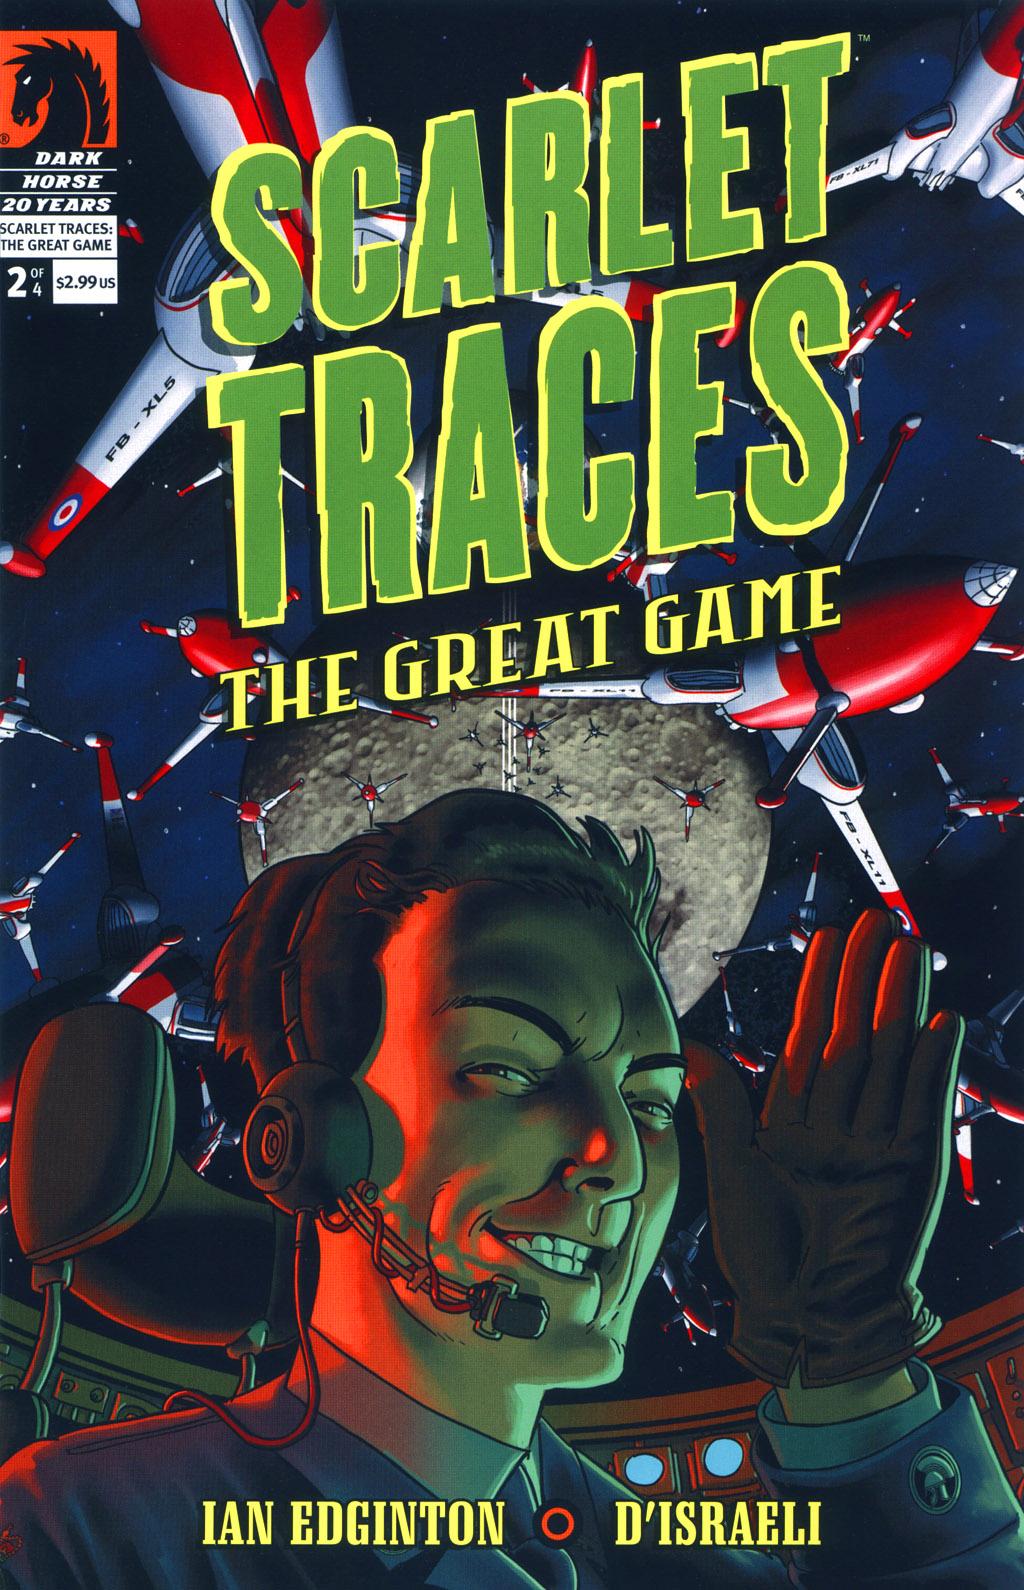 Scarlet Traces: The Great Game Vol. 1 #2